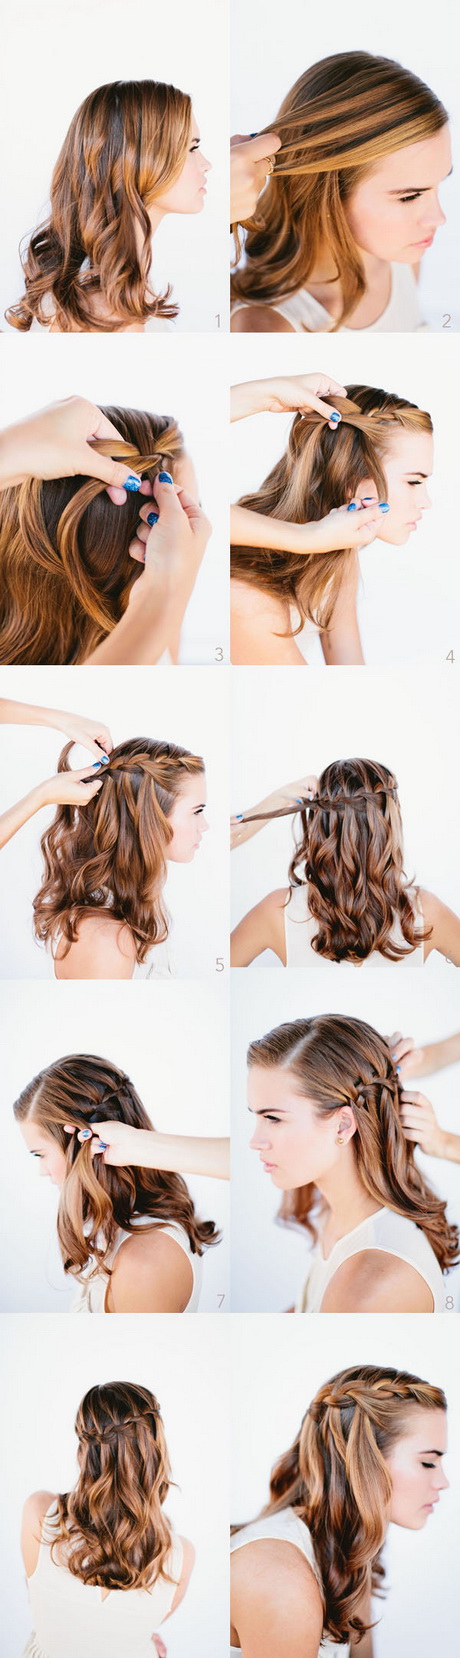 step-by-step-prom-hairstyles-for-long-hair-51_8 Step by step prom hairstyles for long hair